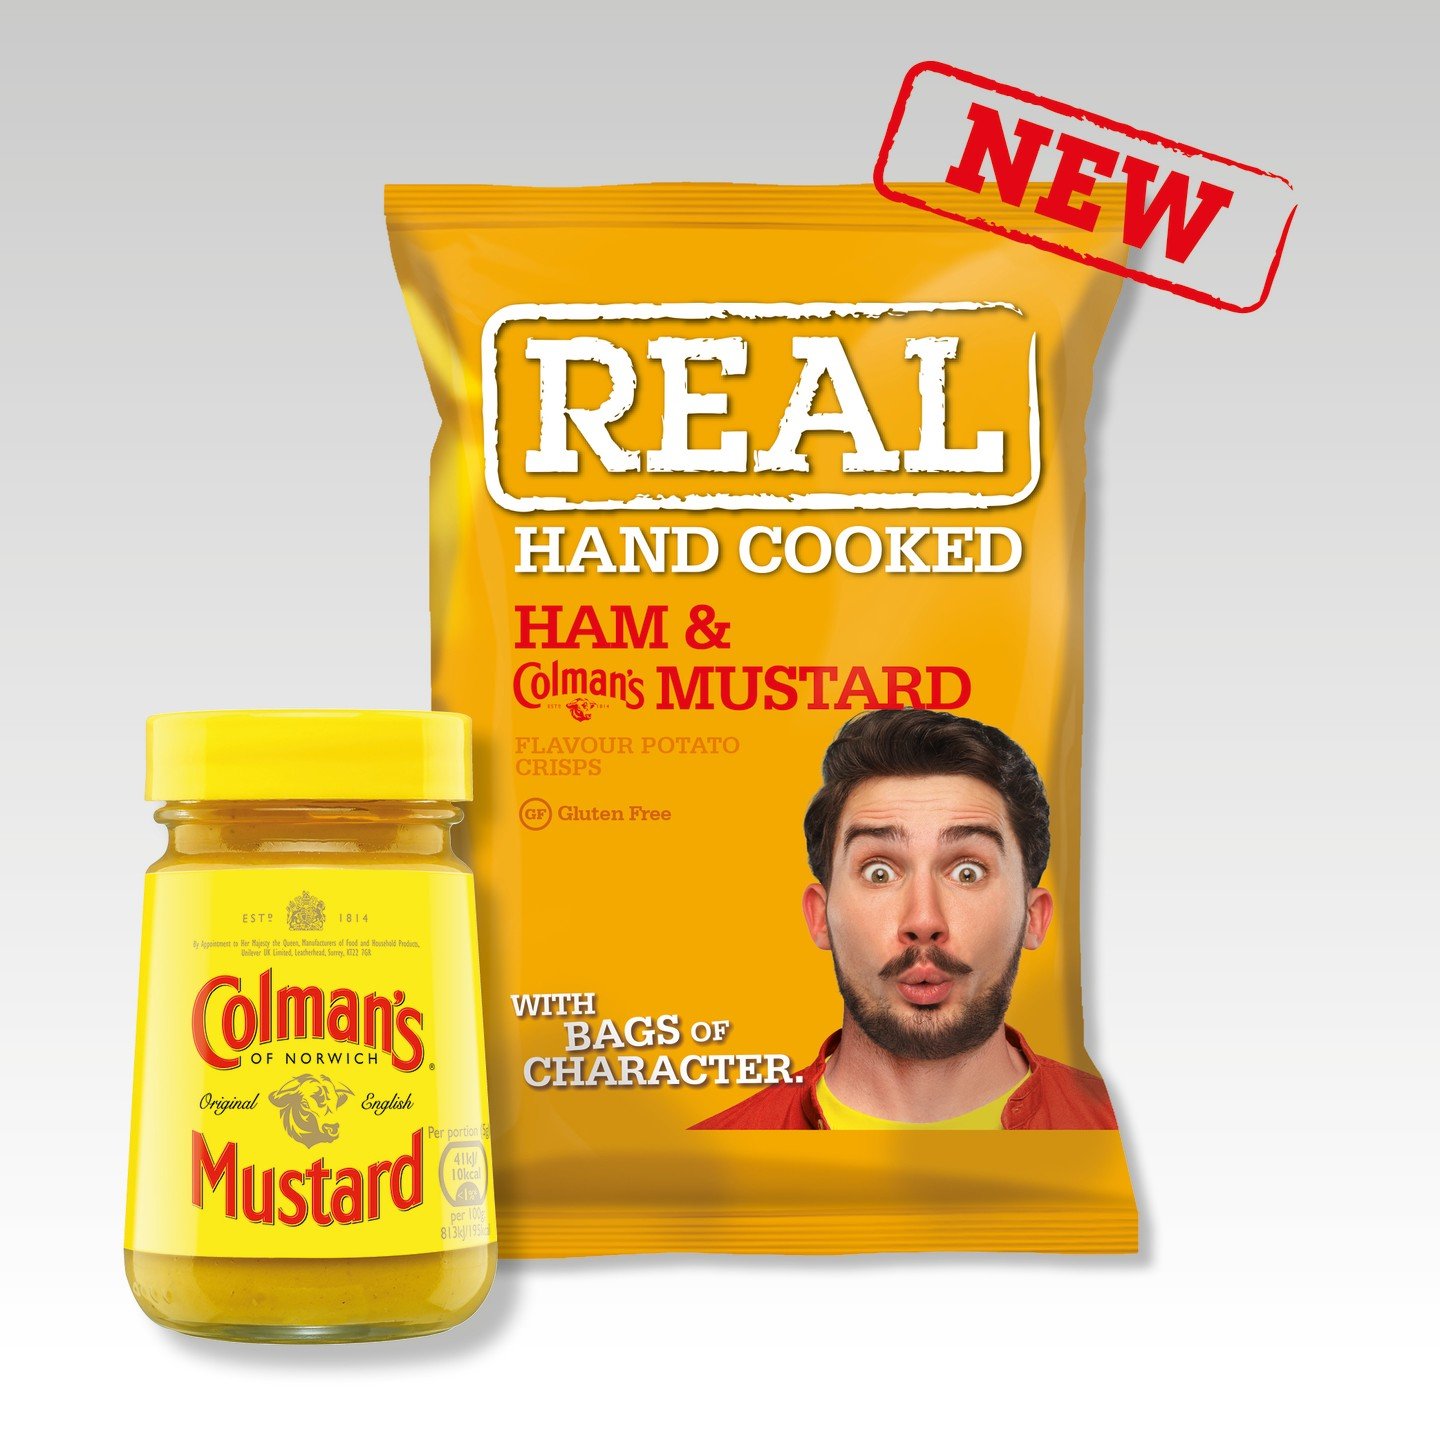 Promoted: REAL hand cooked crisps cut the mustard with new Colman&rsquo;s collab.
Colman&rsquo;s, the UK&rsquo;s number one mustard brand, has partnered with premium food service exclusive hand cooked crisp brand @realhandcooked to relaunch its Ham &